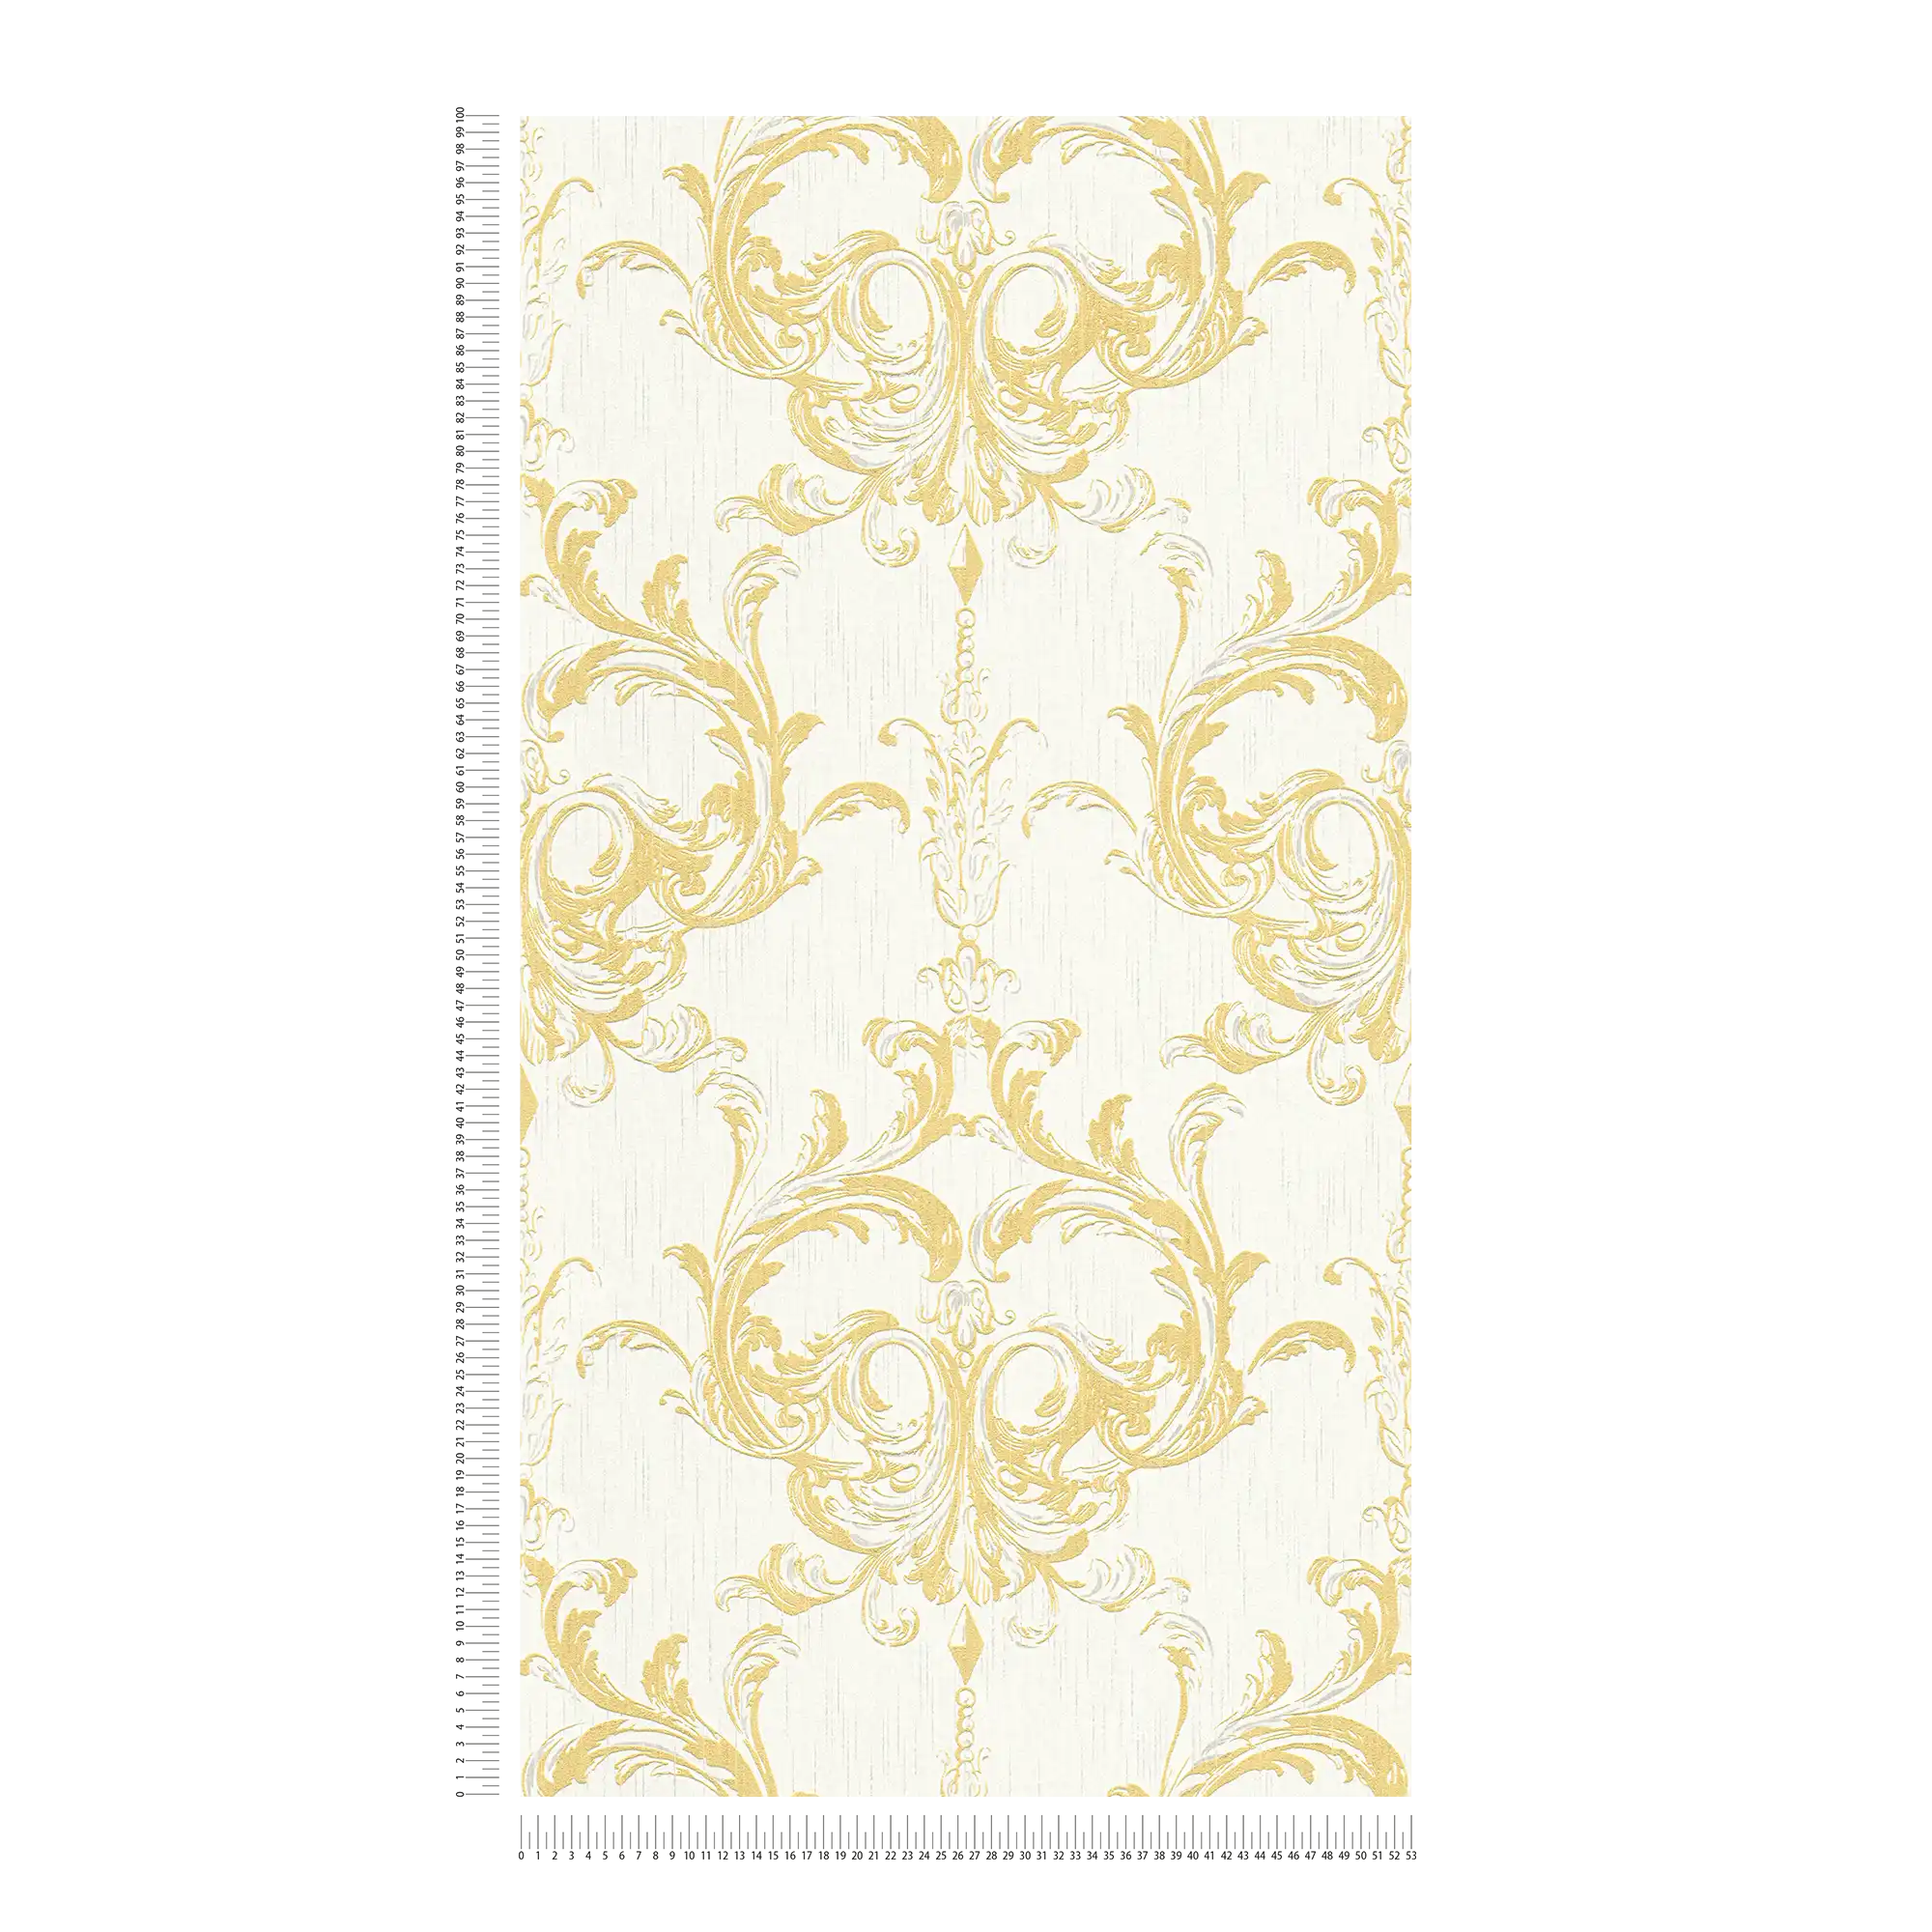             Non-woven wallpaper historical ornament design with texture effect - gold, white
        